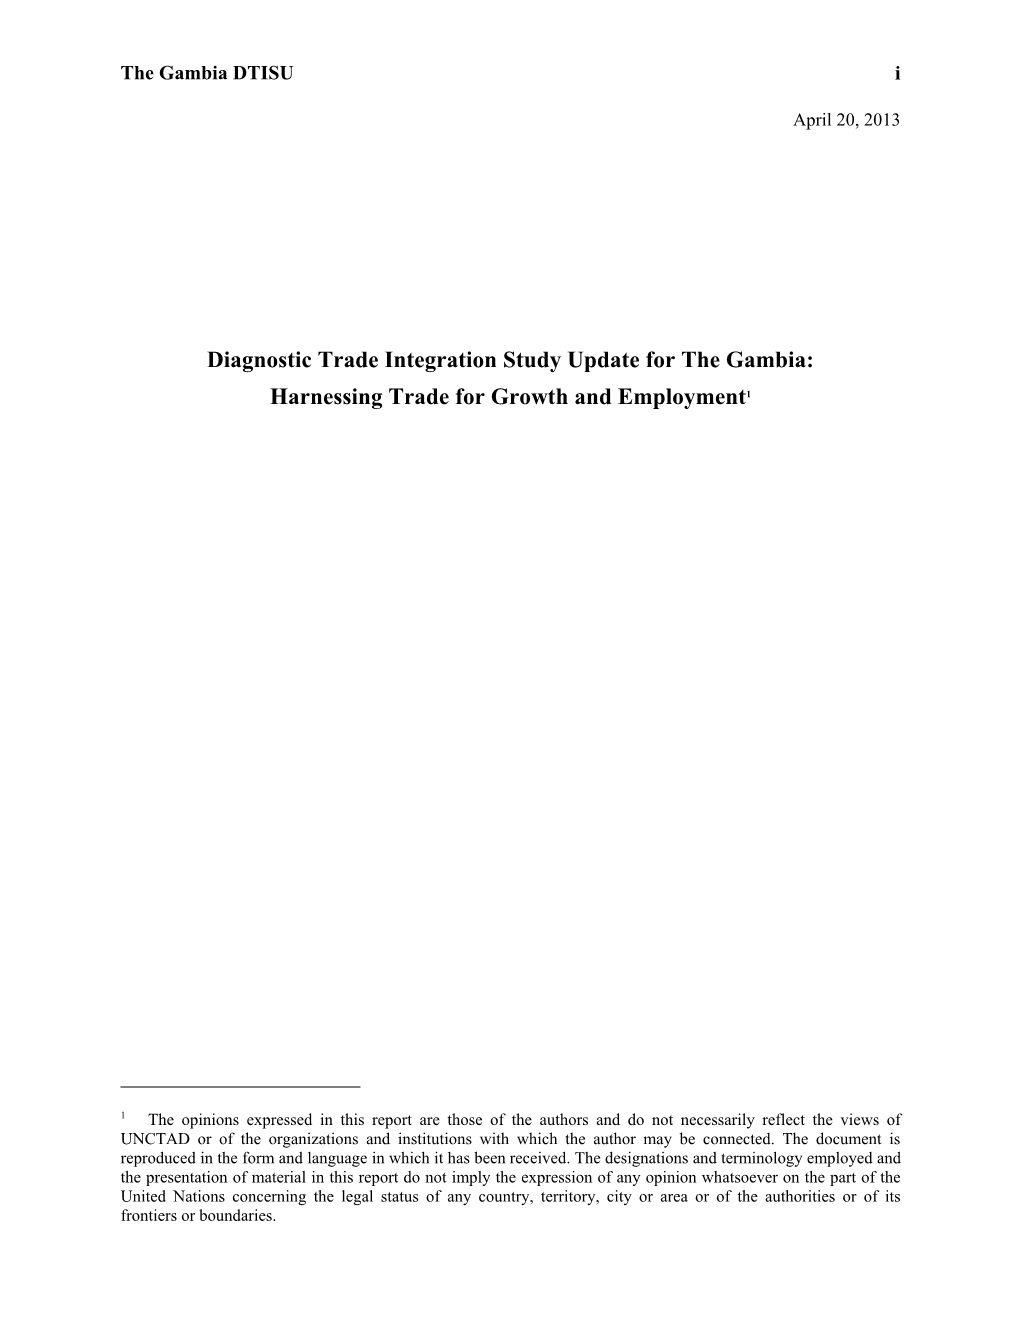 Diagnostic Trade Integration Study Update for the Gambia: Harnessing Trade for Growth and Employment1